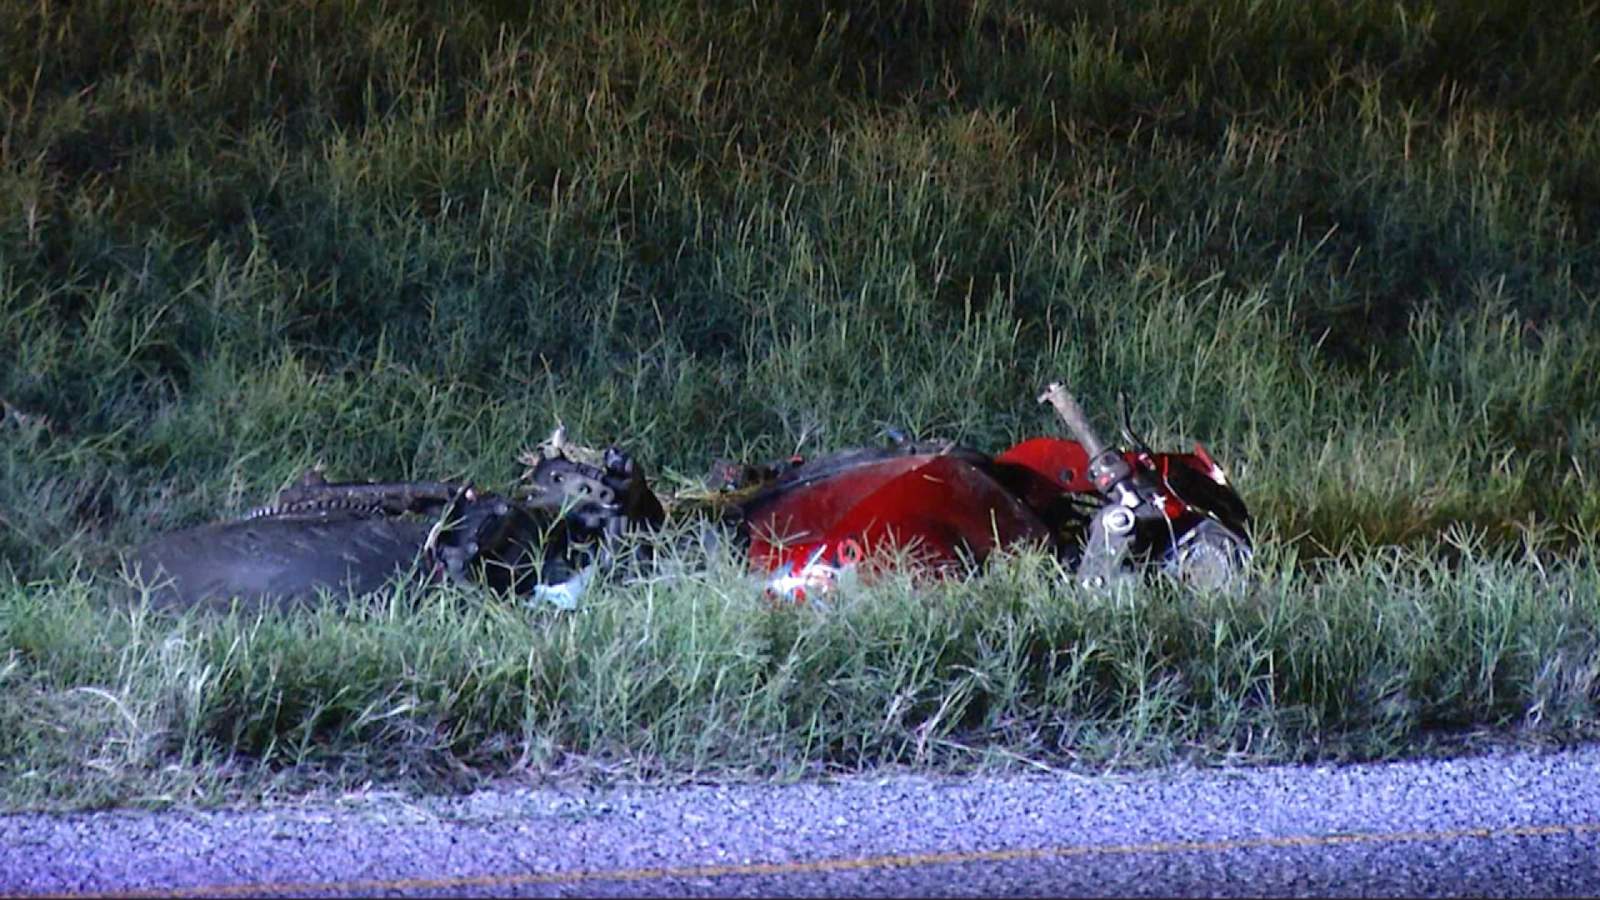 Motorcycle racing on Loop 410 ends with 1 dead, 1 seriously injured, police say